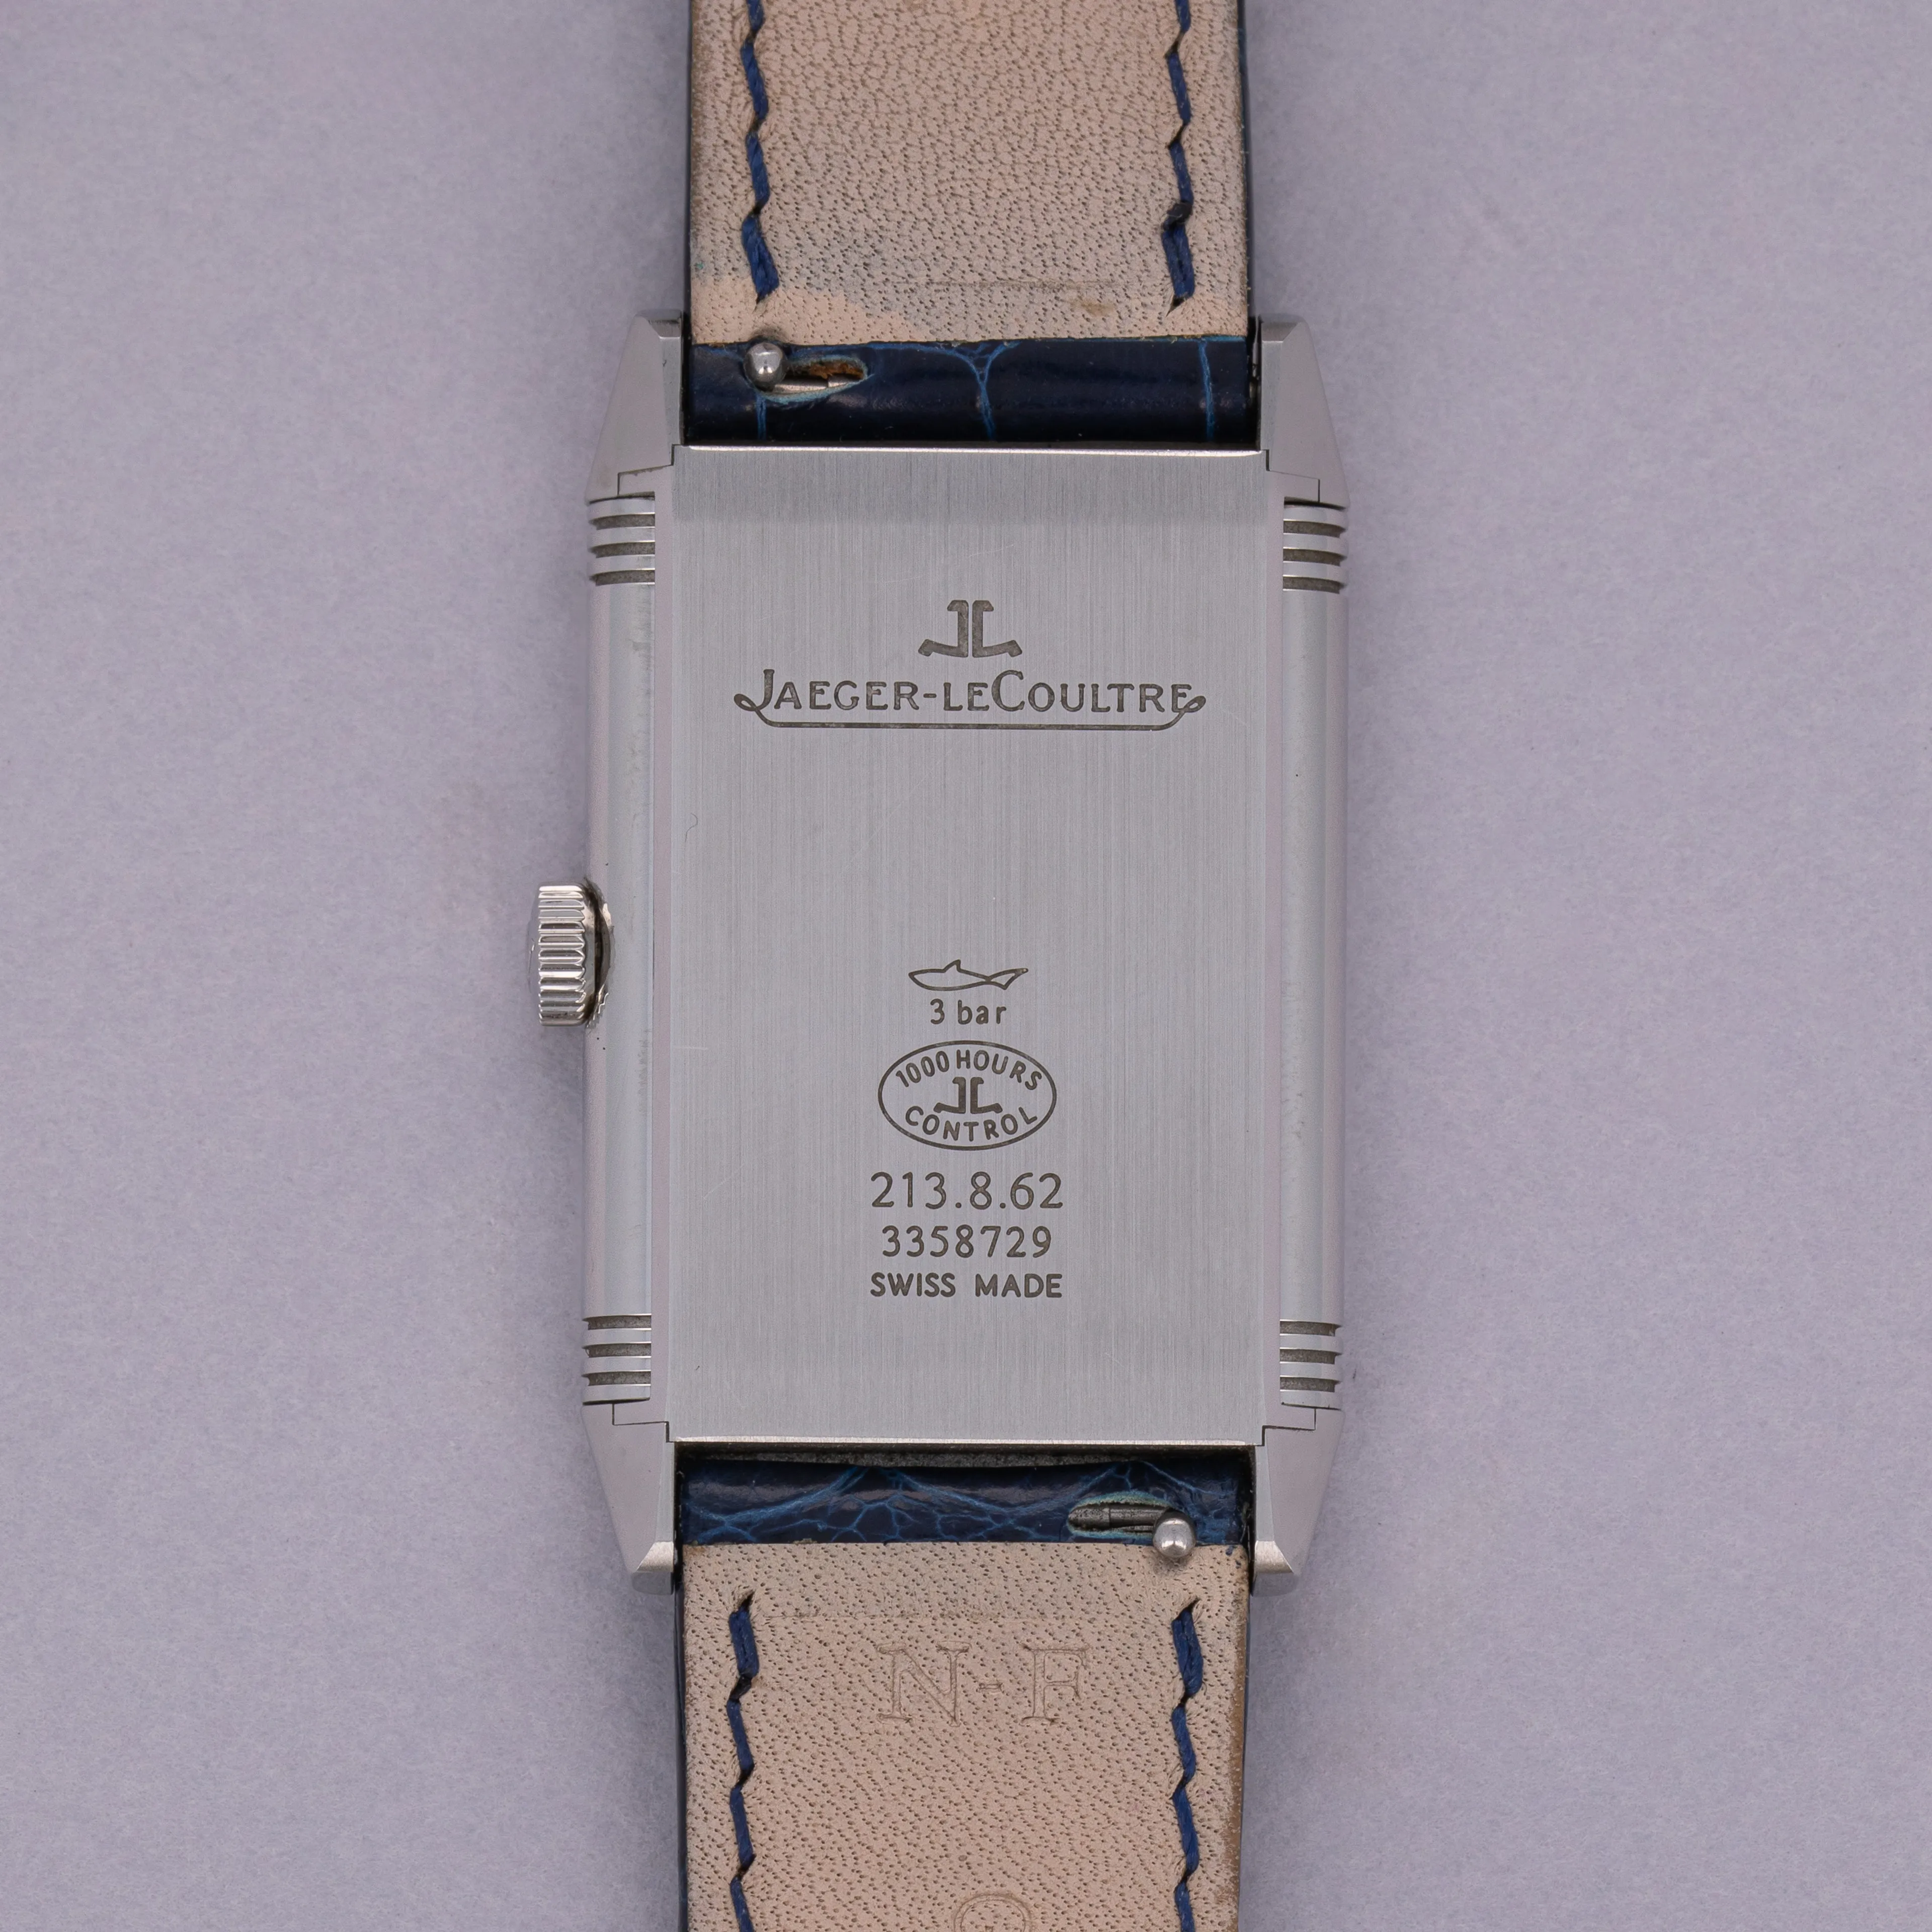 Jaeger-LeCoultre Reverso 213.8.62 25.5mm Stainless steel Silver 4